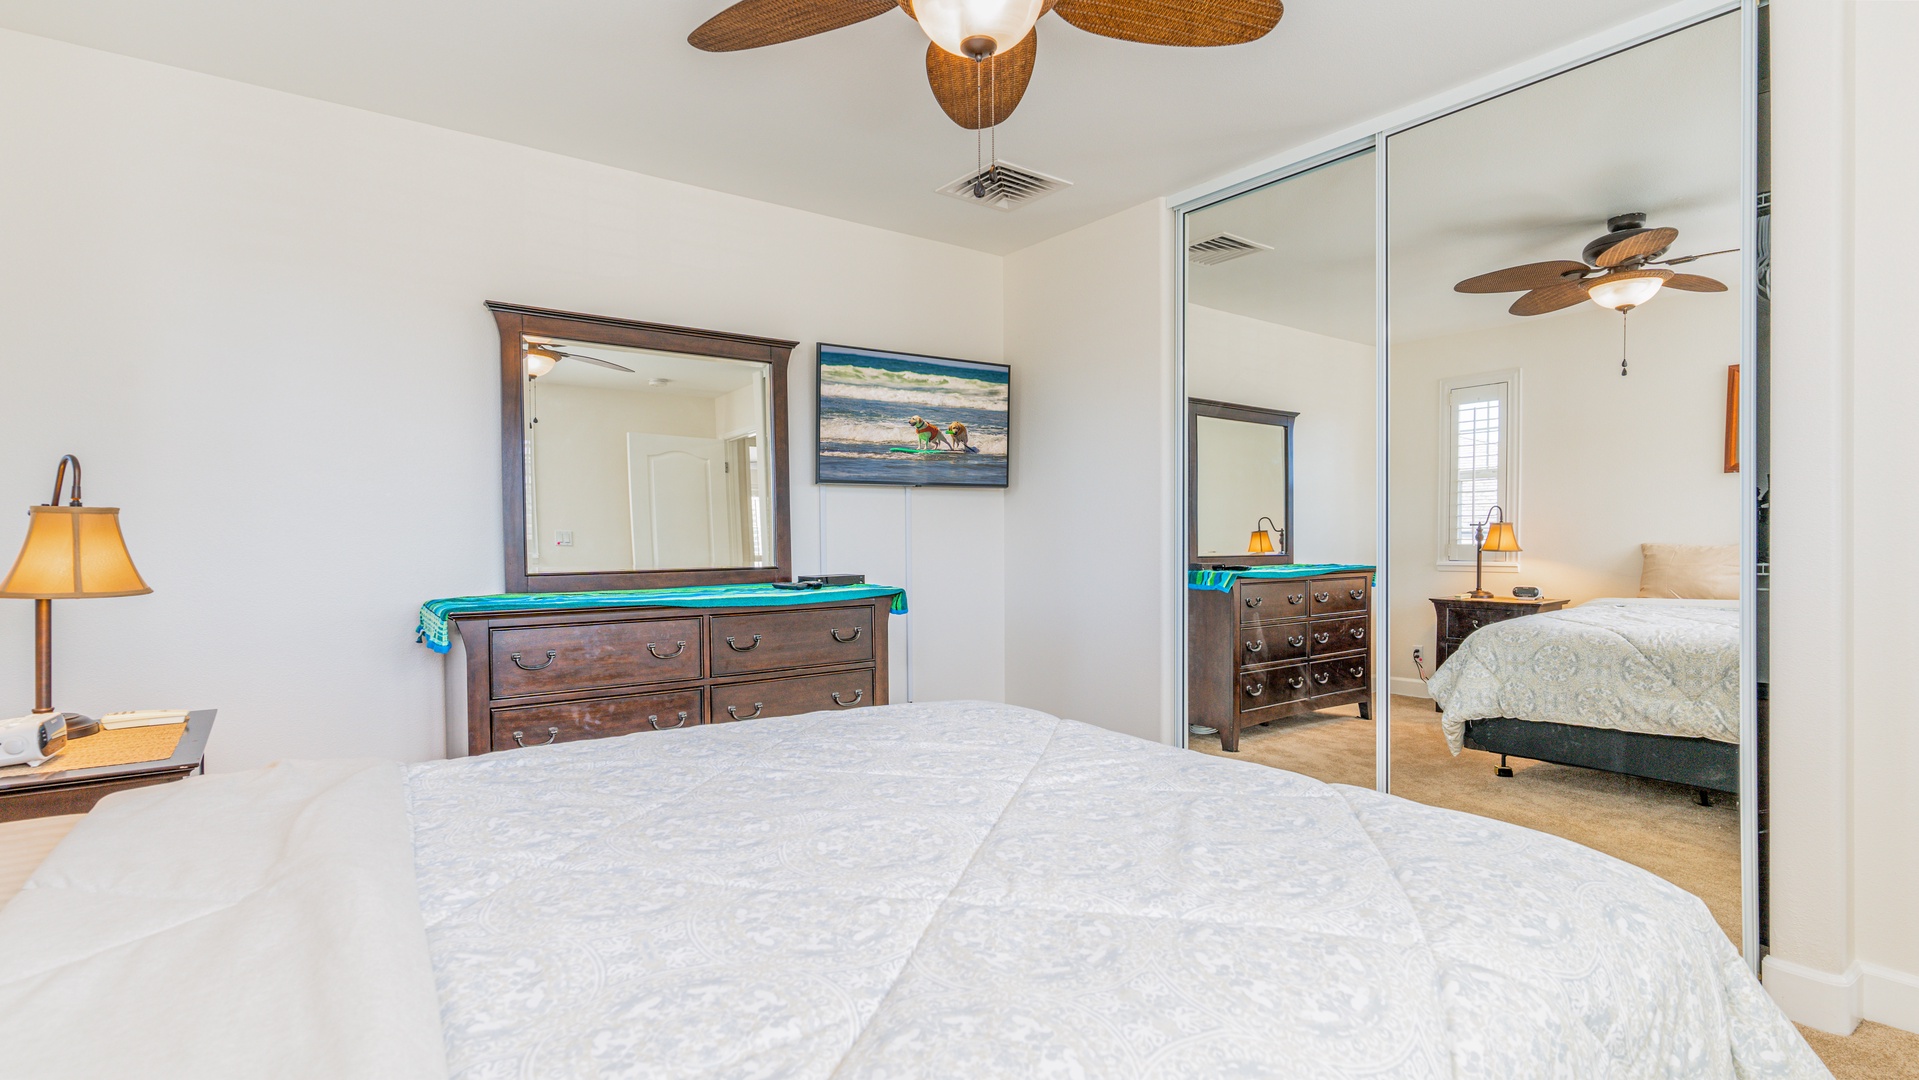 Kapolei Vacation Rentals, Ko Olina Kai 1057B - The second guest bedroom featuring a ceiling fan and large mirror.